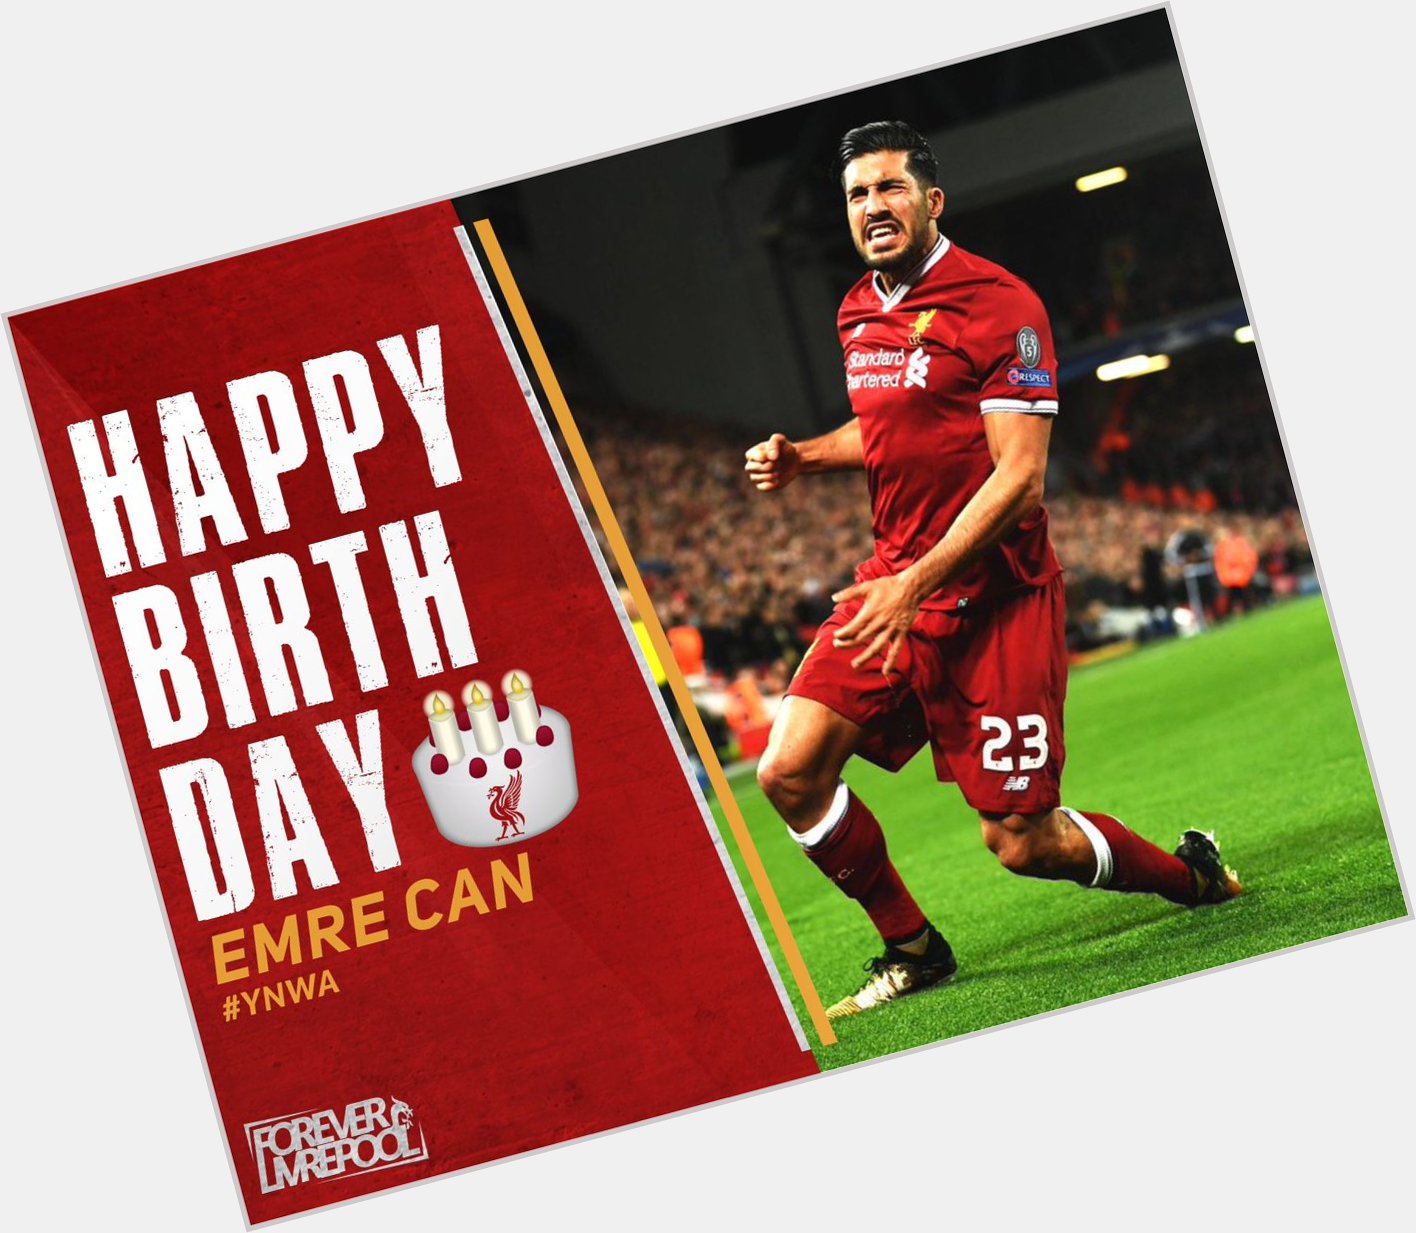 Today, Happy 24th Birthday Emre Can   Wish you all the best, Bro   